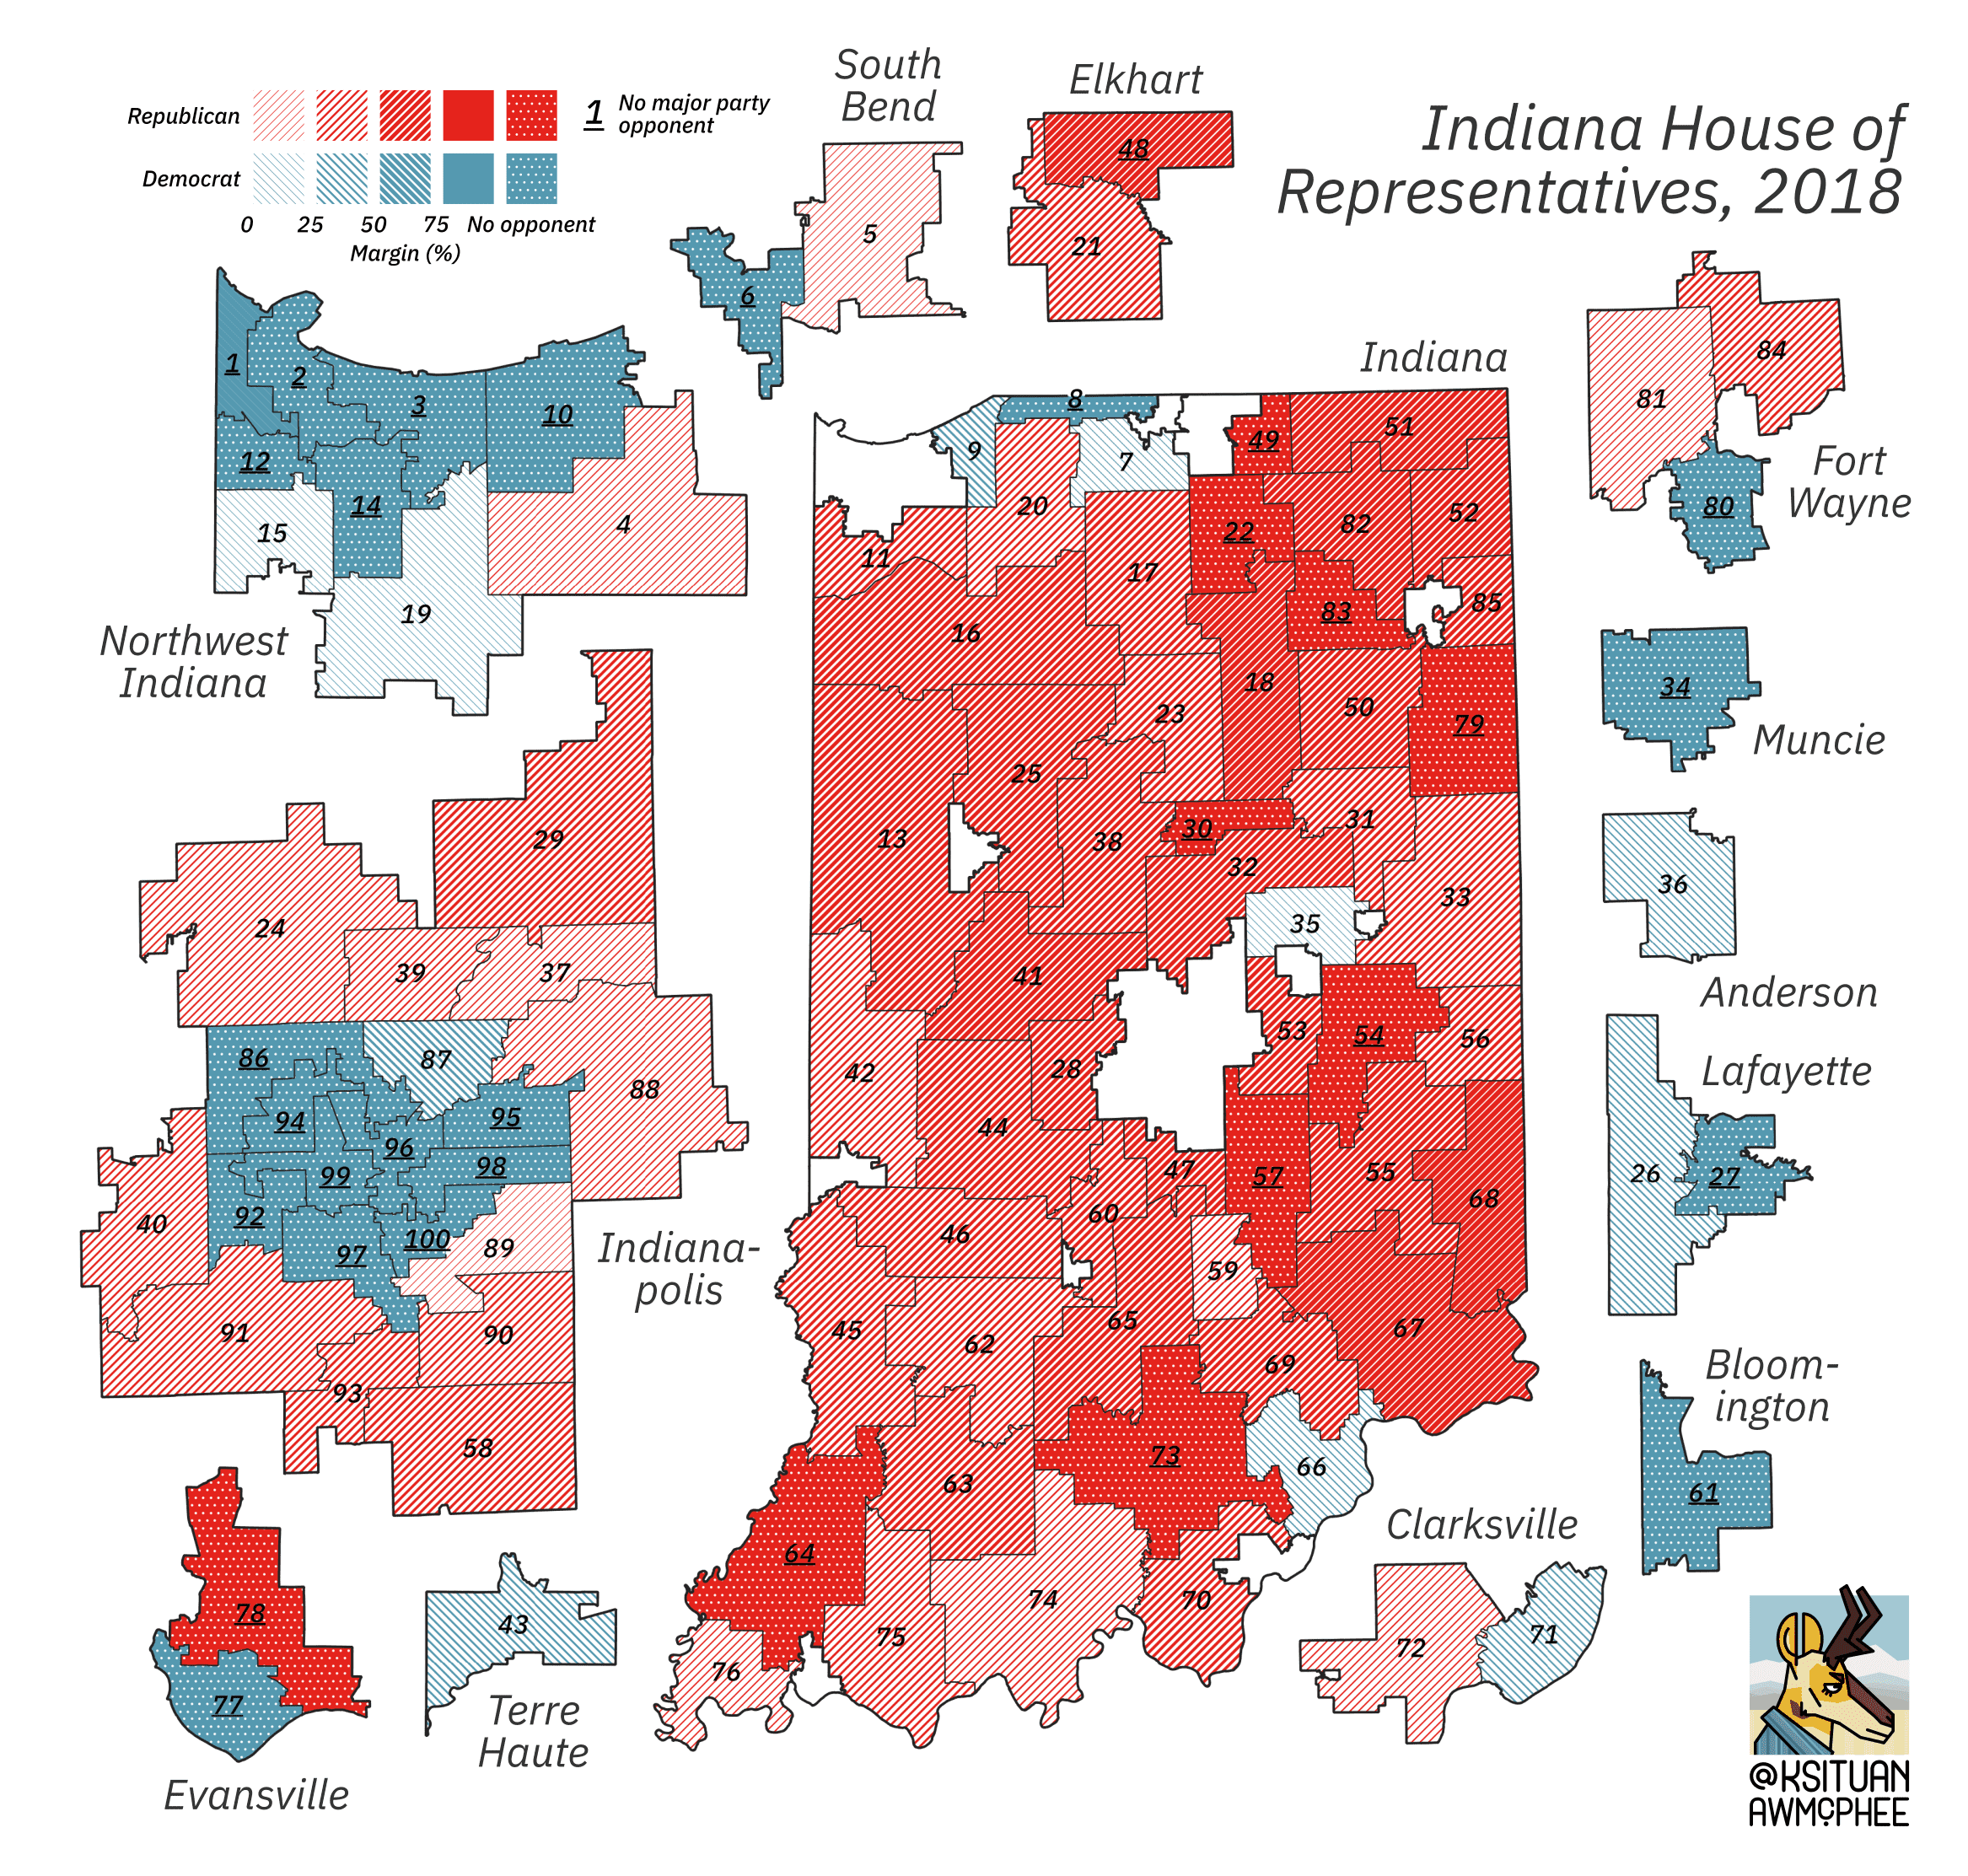 A political map of Indiana.